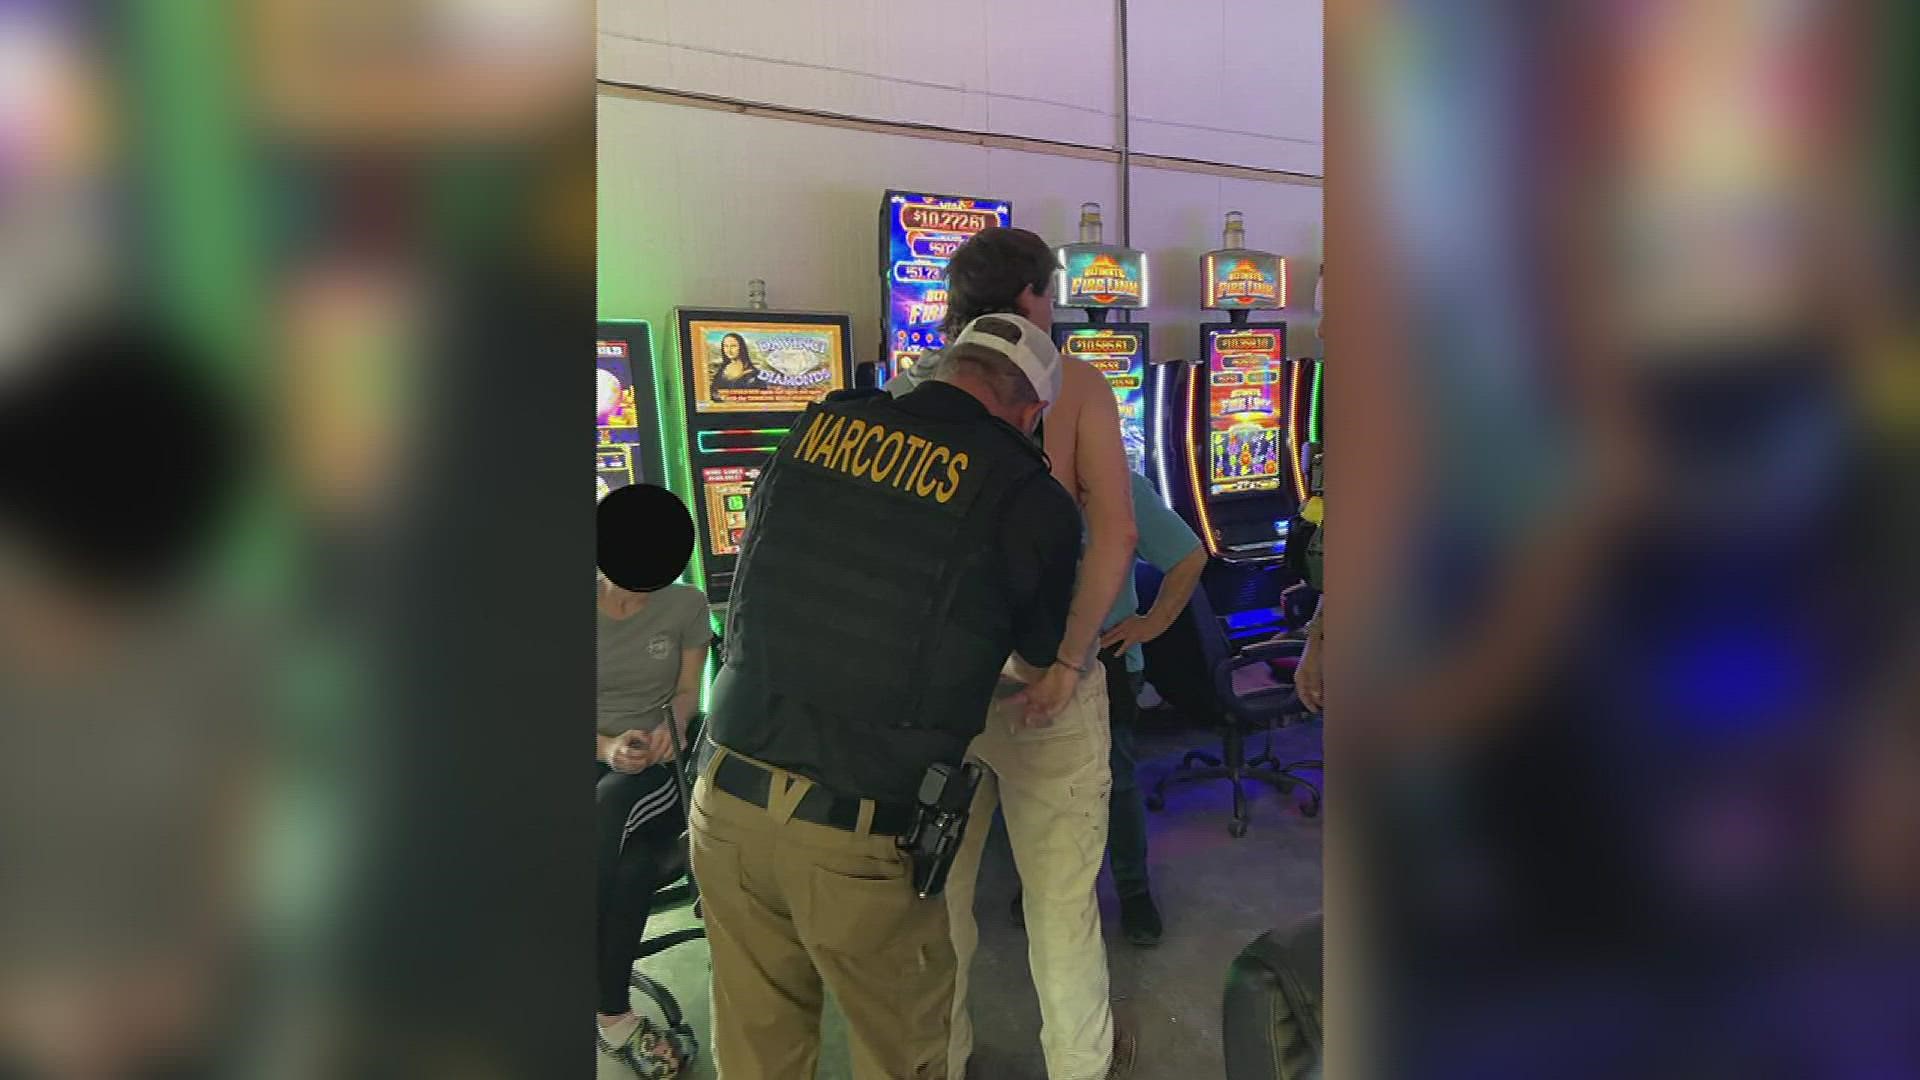 During the inspection a customer of the game room, a 32-year-old male from Jasper, was arrested on a felony larceny warrant out of Hardin County.